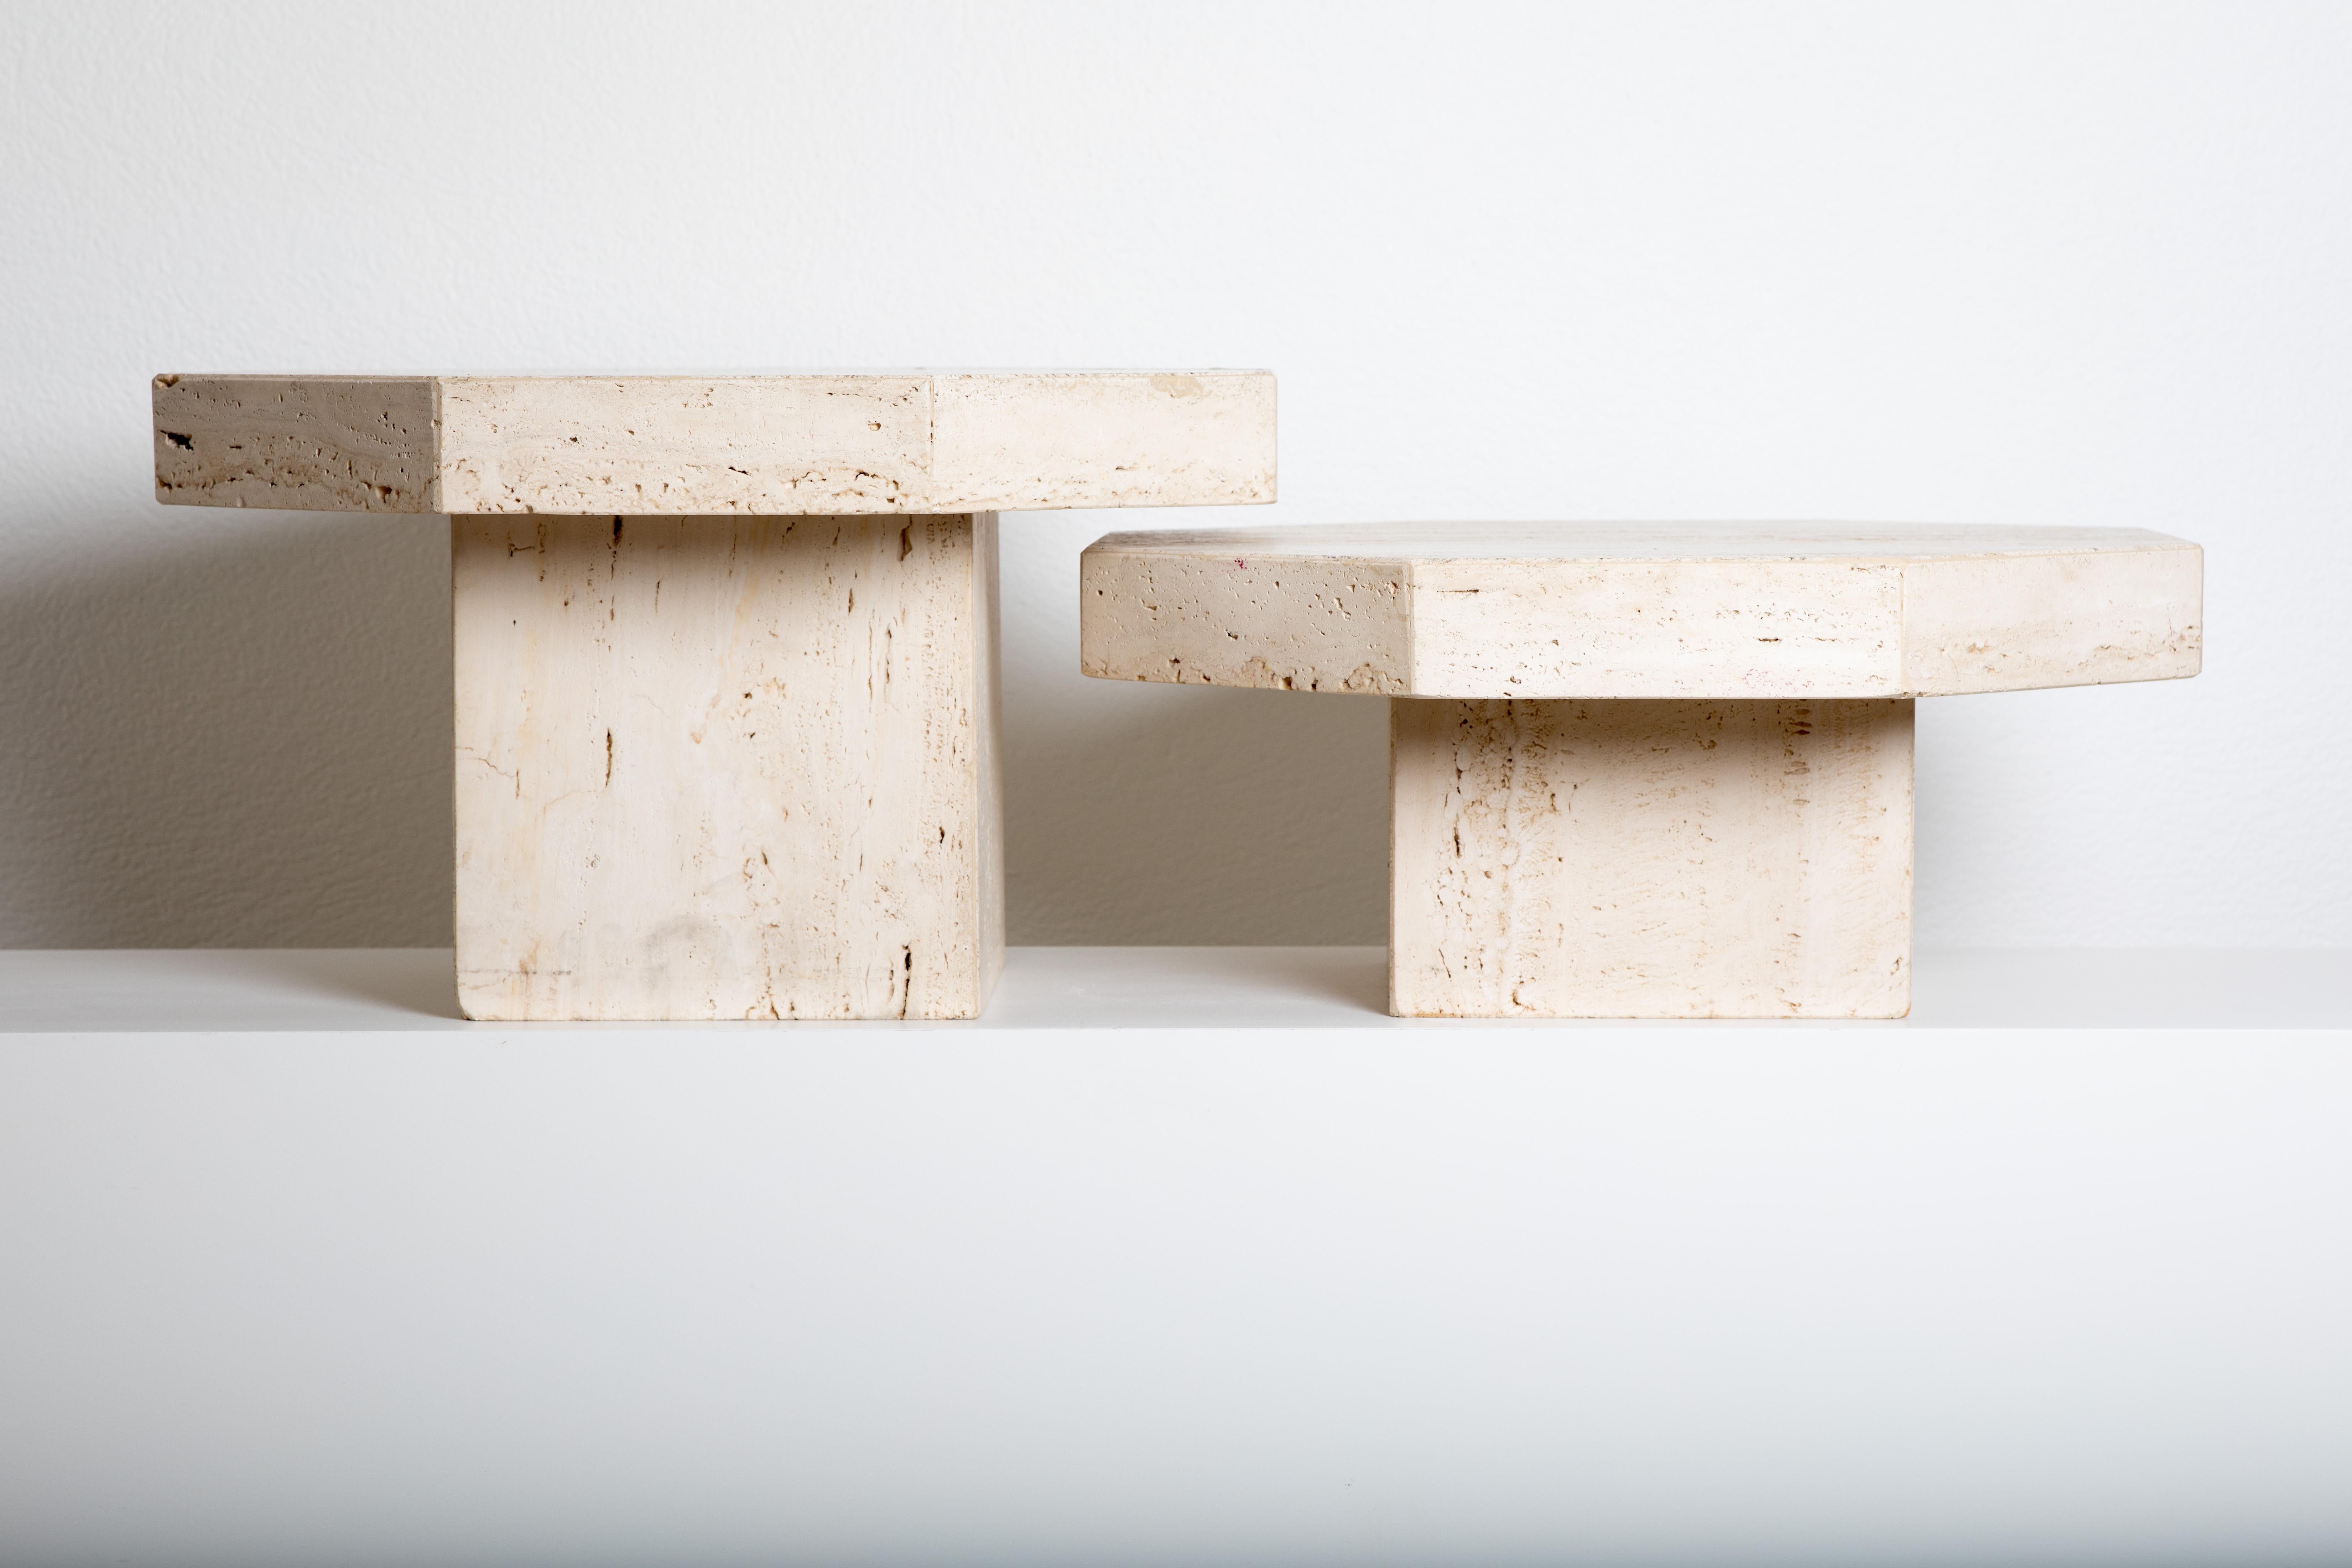 A pair of octagonal travertine tables could be a stylish and sophisticated addition to your furniture collection. Travertine is a type of limestone that is often used in furniture design due to its unique and naturally occurring patterns. Octagonal